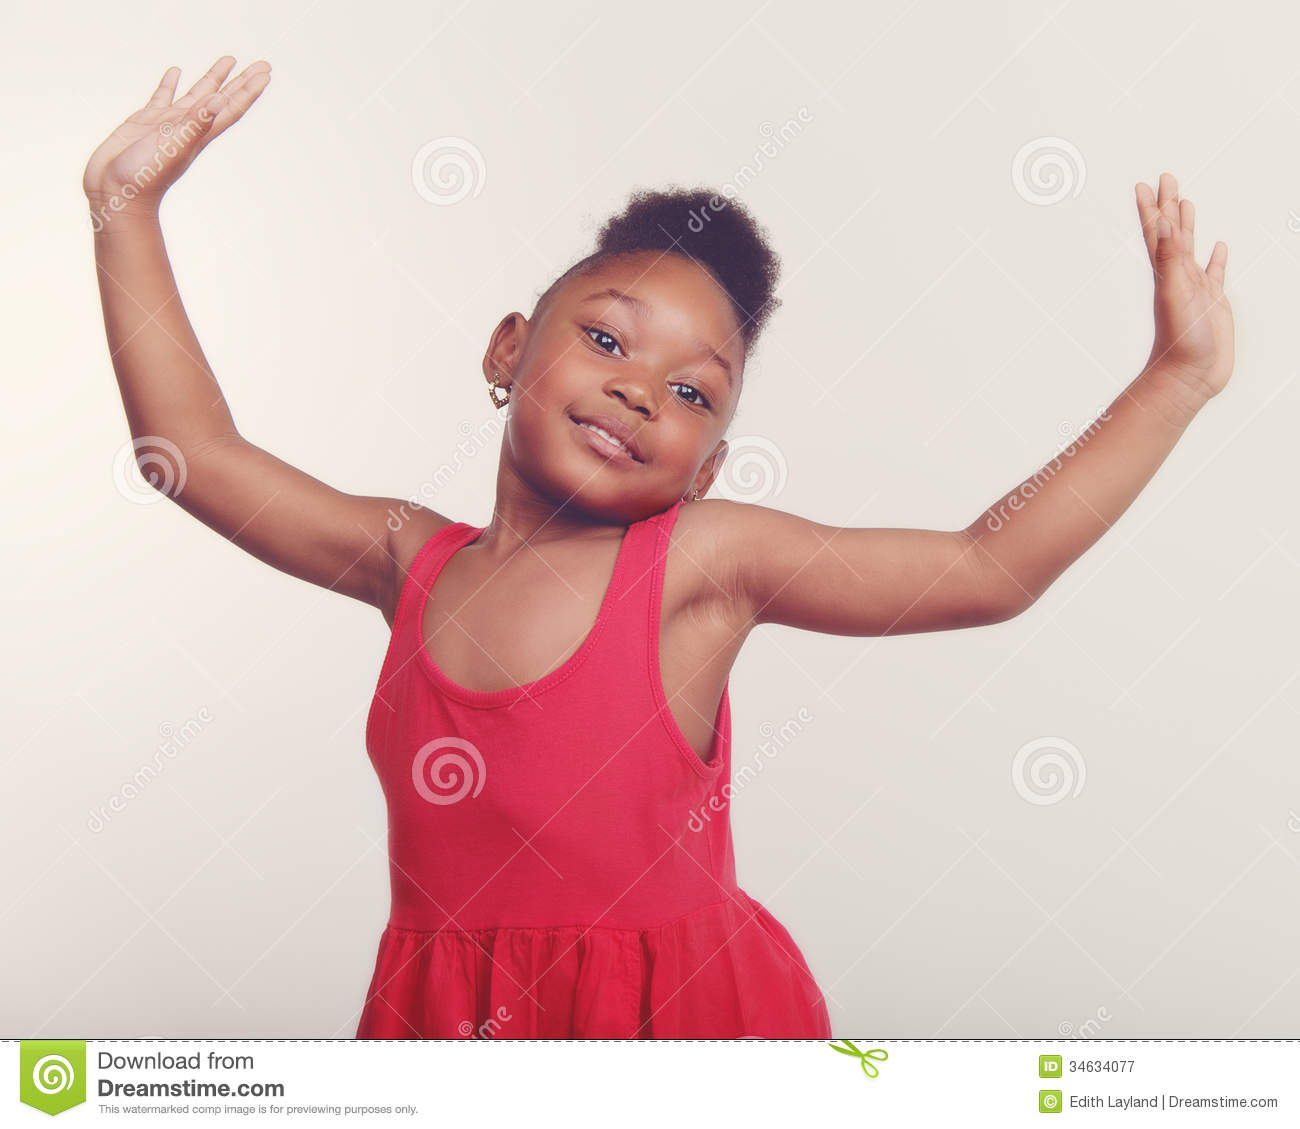 Little Dancer Girl Royalty Free Stock Photography   Image  34634077